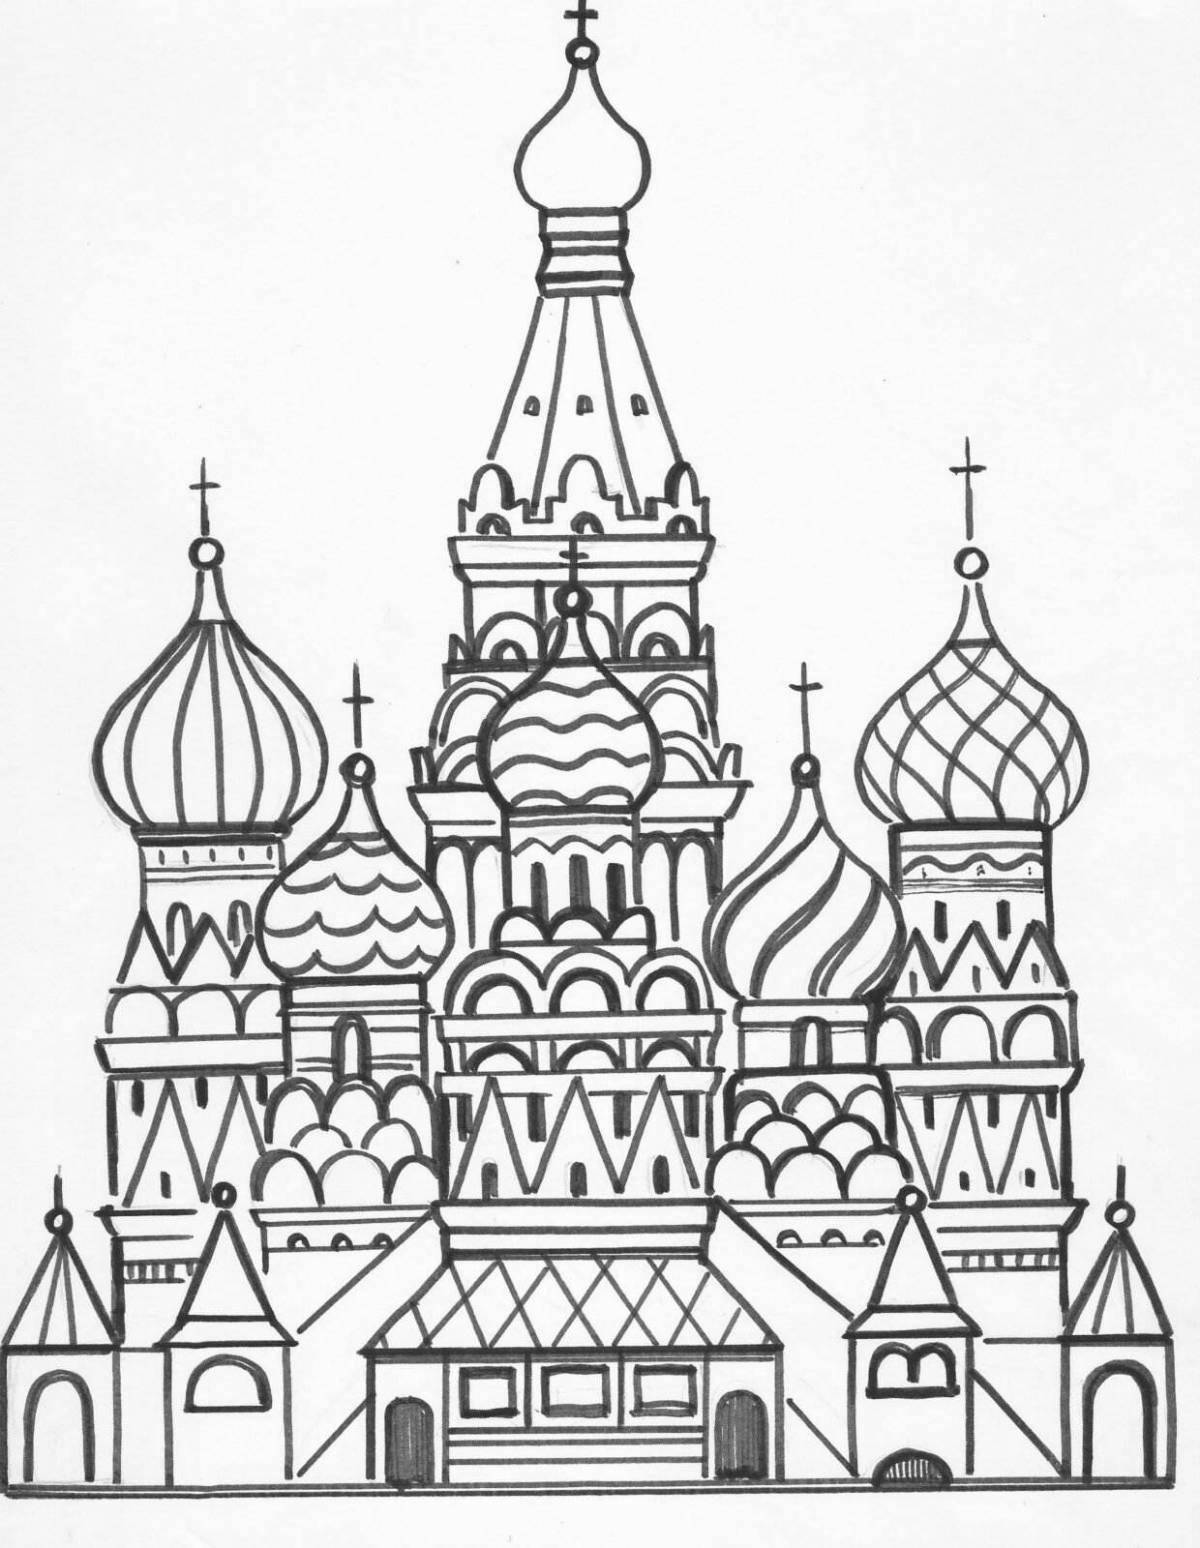 Dazzling coloring of the sights of Russia